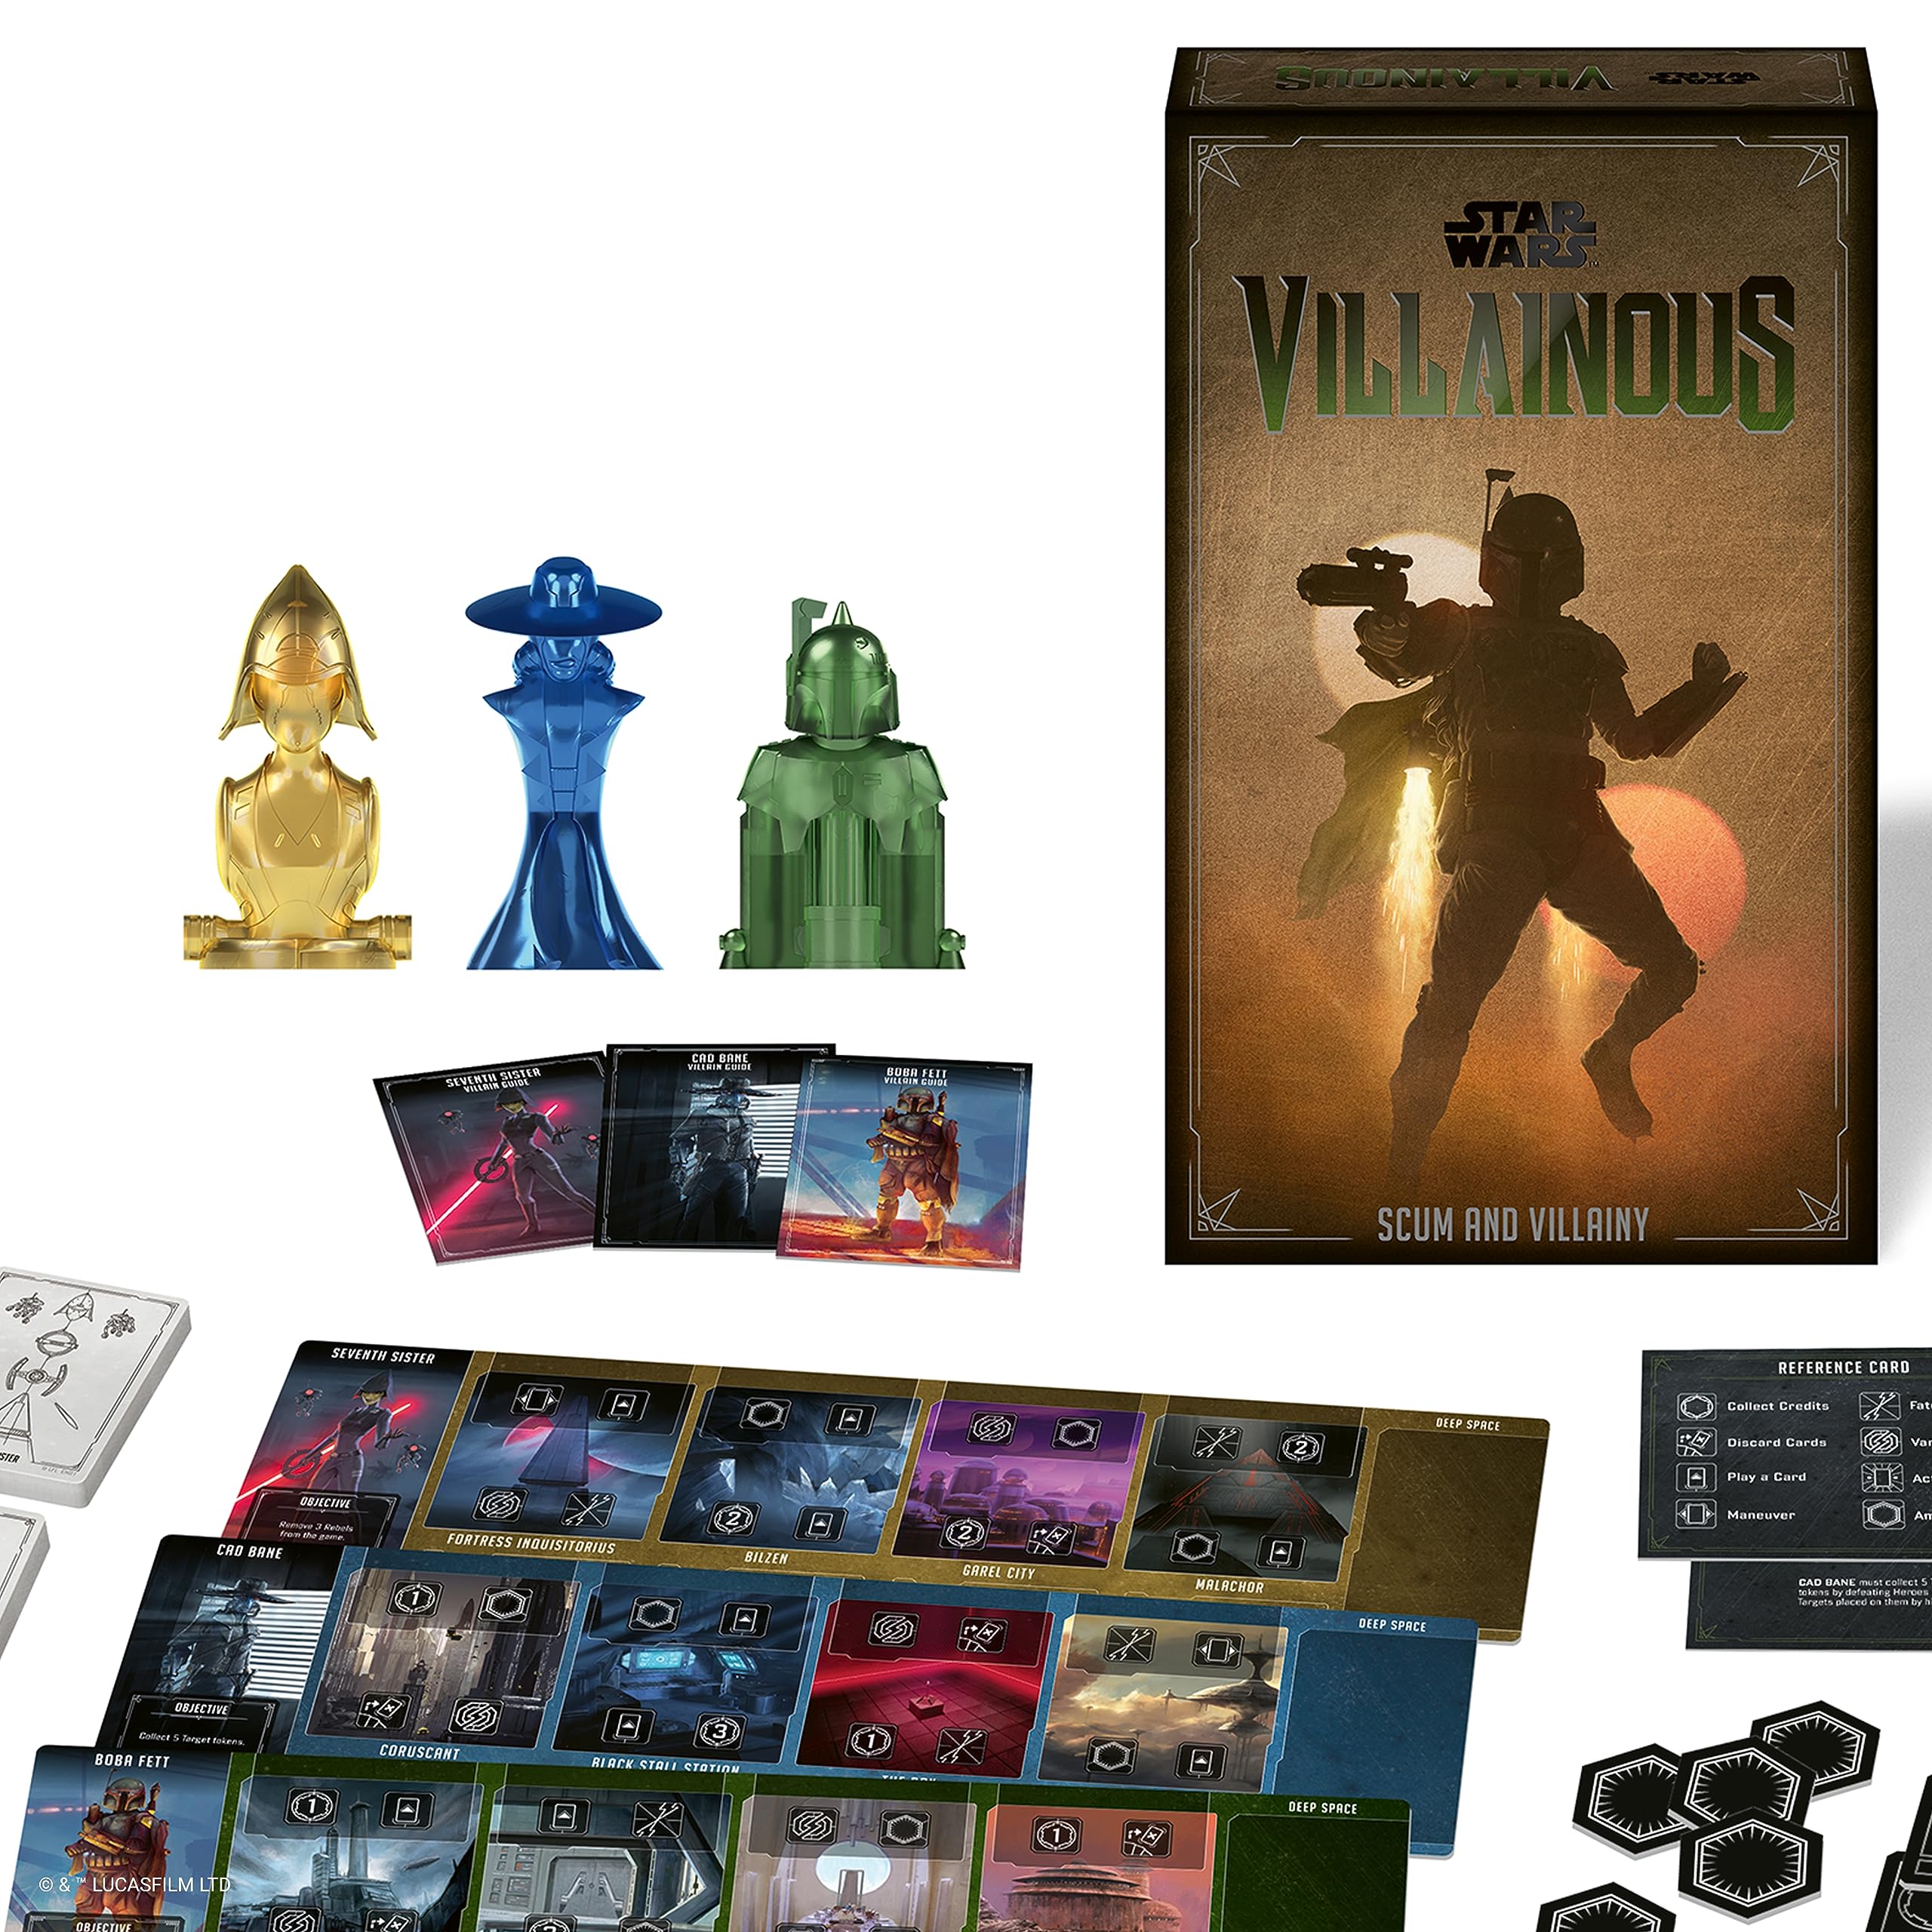 Star Wars Villainous: Scum and Villainy Strategy Board Game for Ages 10 & Up – The First Star Wars Villainous Expandalone